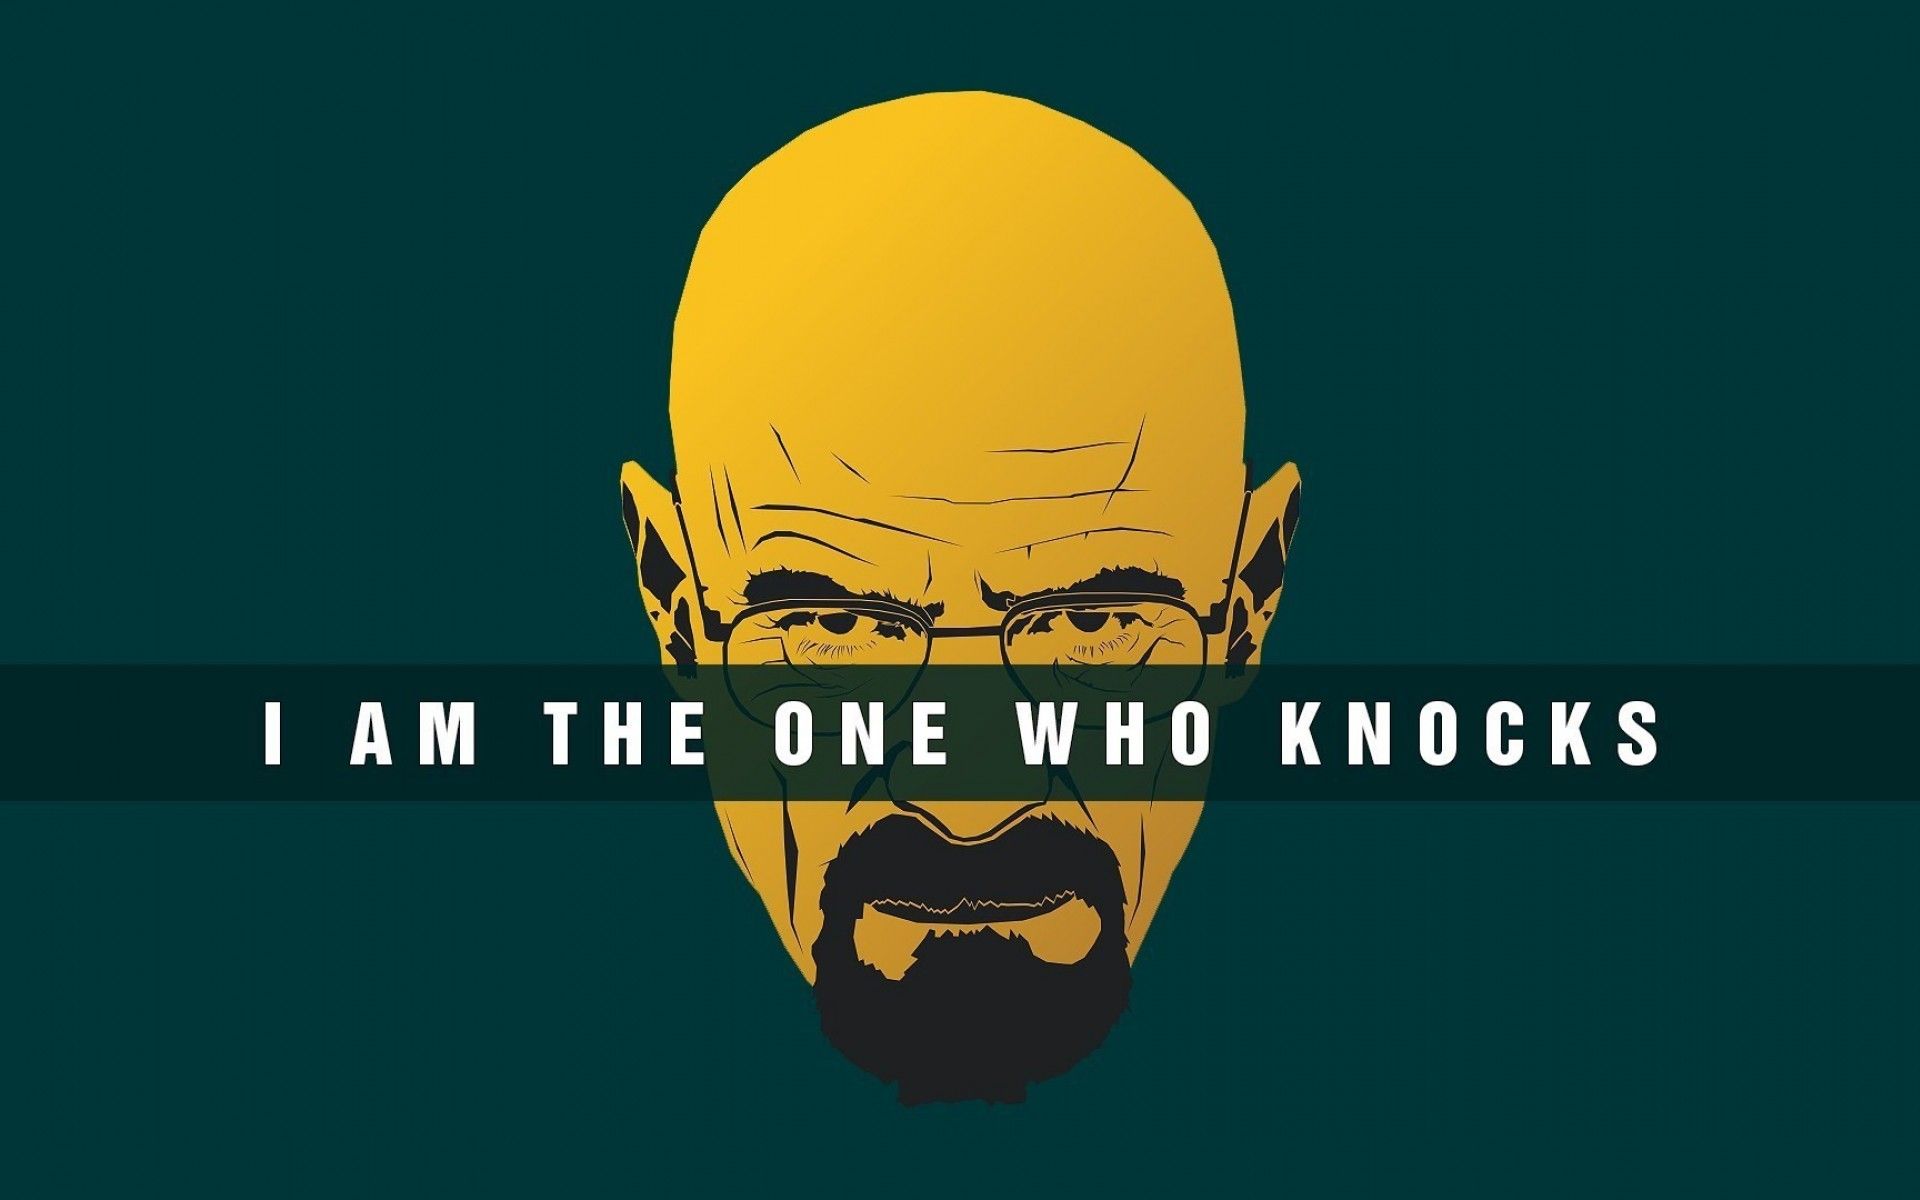 I Am The One Who Knocks, HD Tv Shows, 4k Wallpaper, Image, Background, Photo and Picture